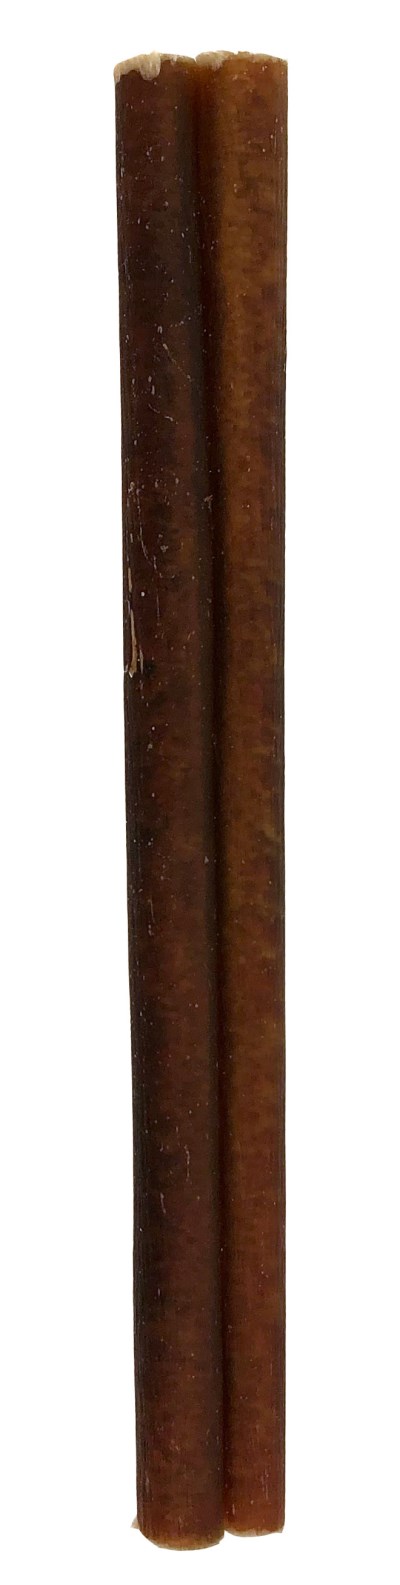 Made In South America Dog Chew - Bully Stick - 6 in-each